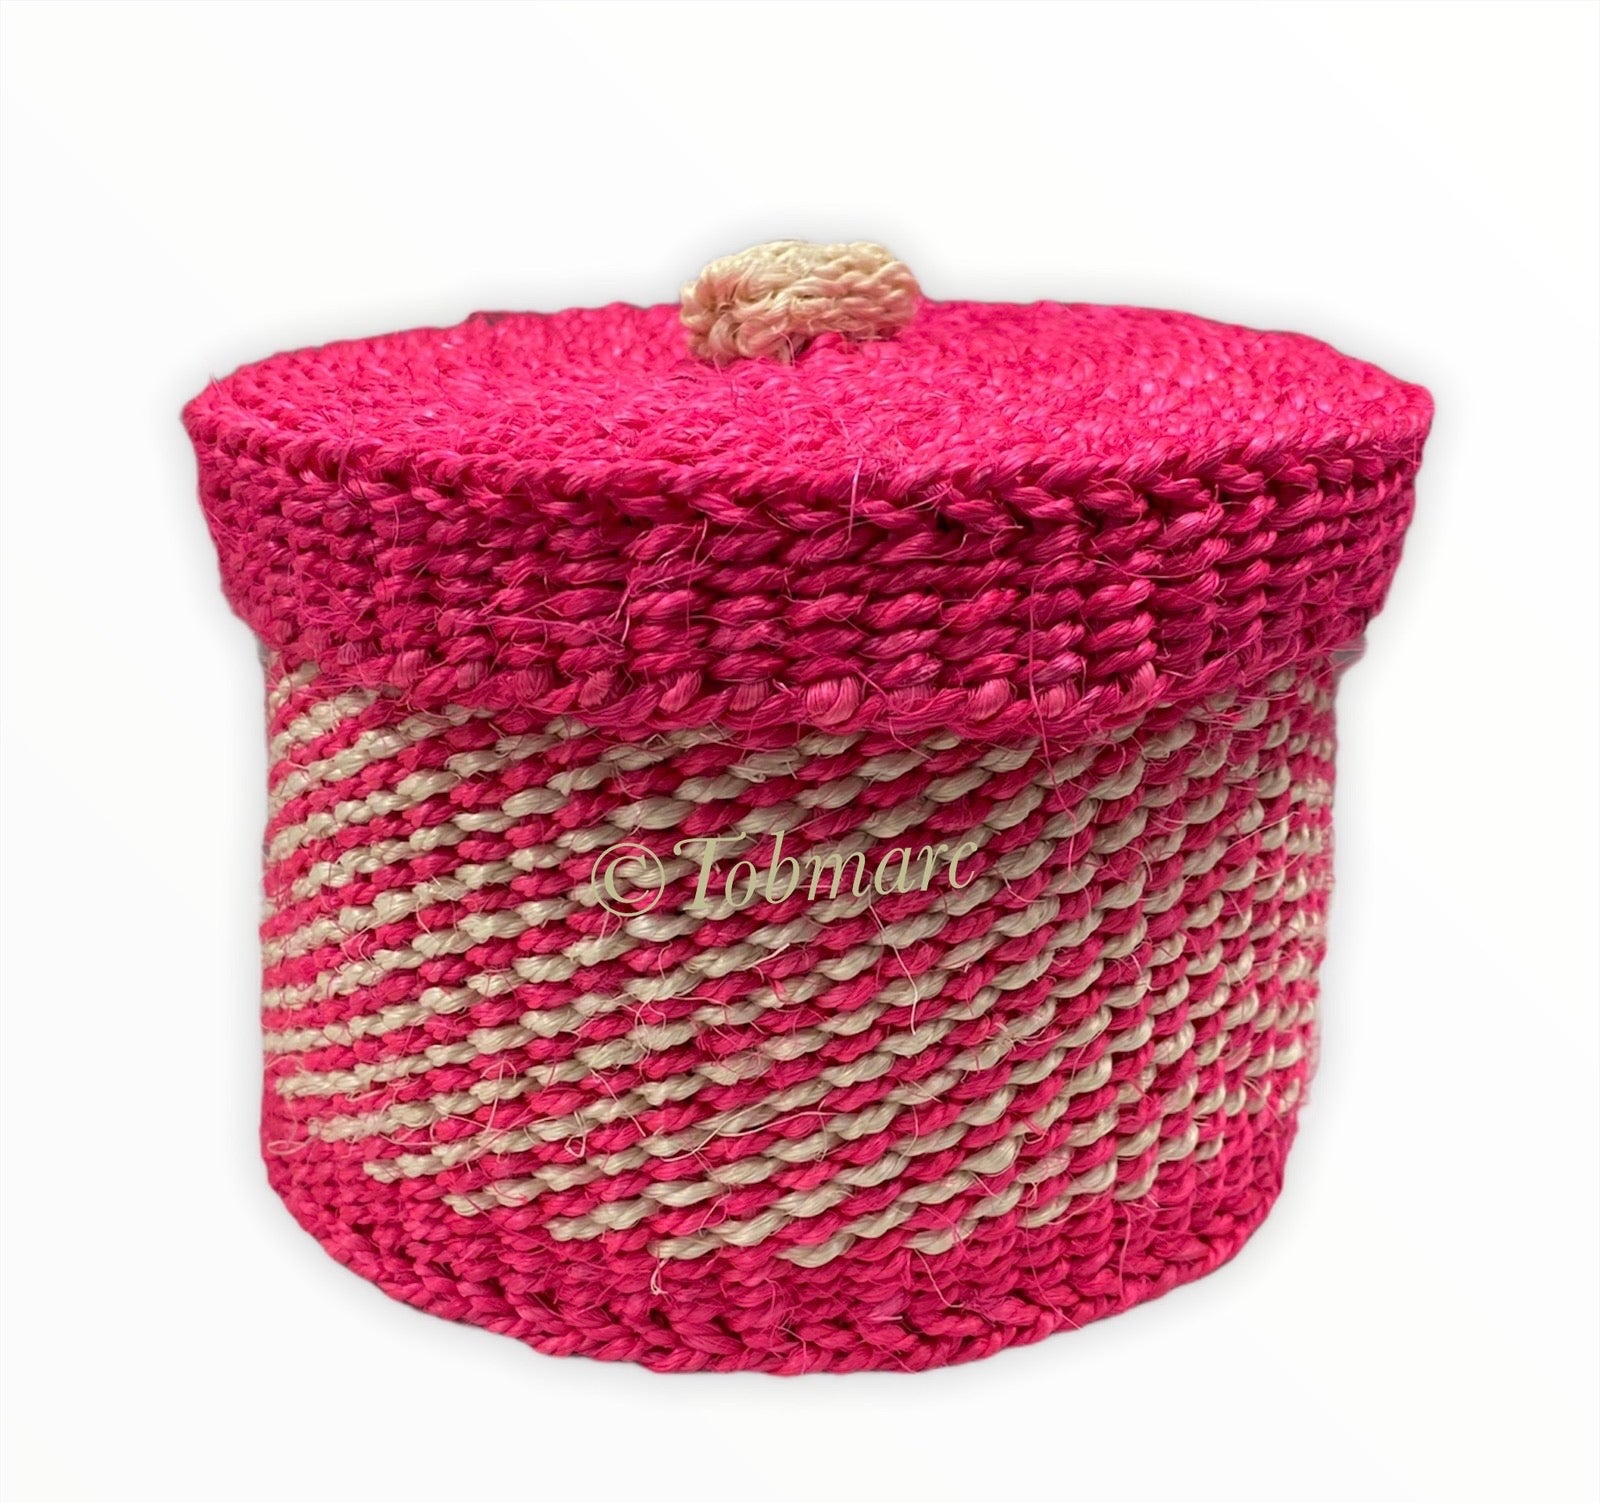 Small Storage Baskets, Organizing Baskets - Tobmarc Home Decor & Gifts 